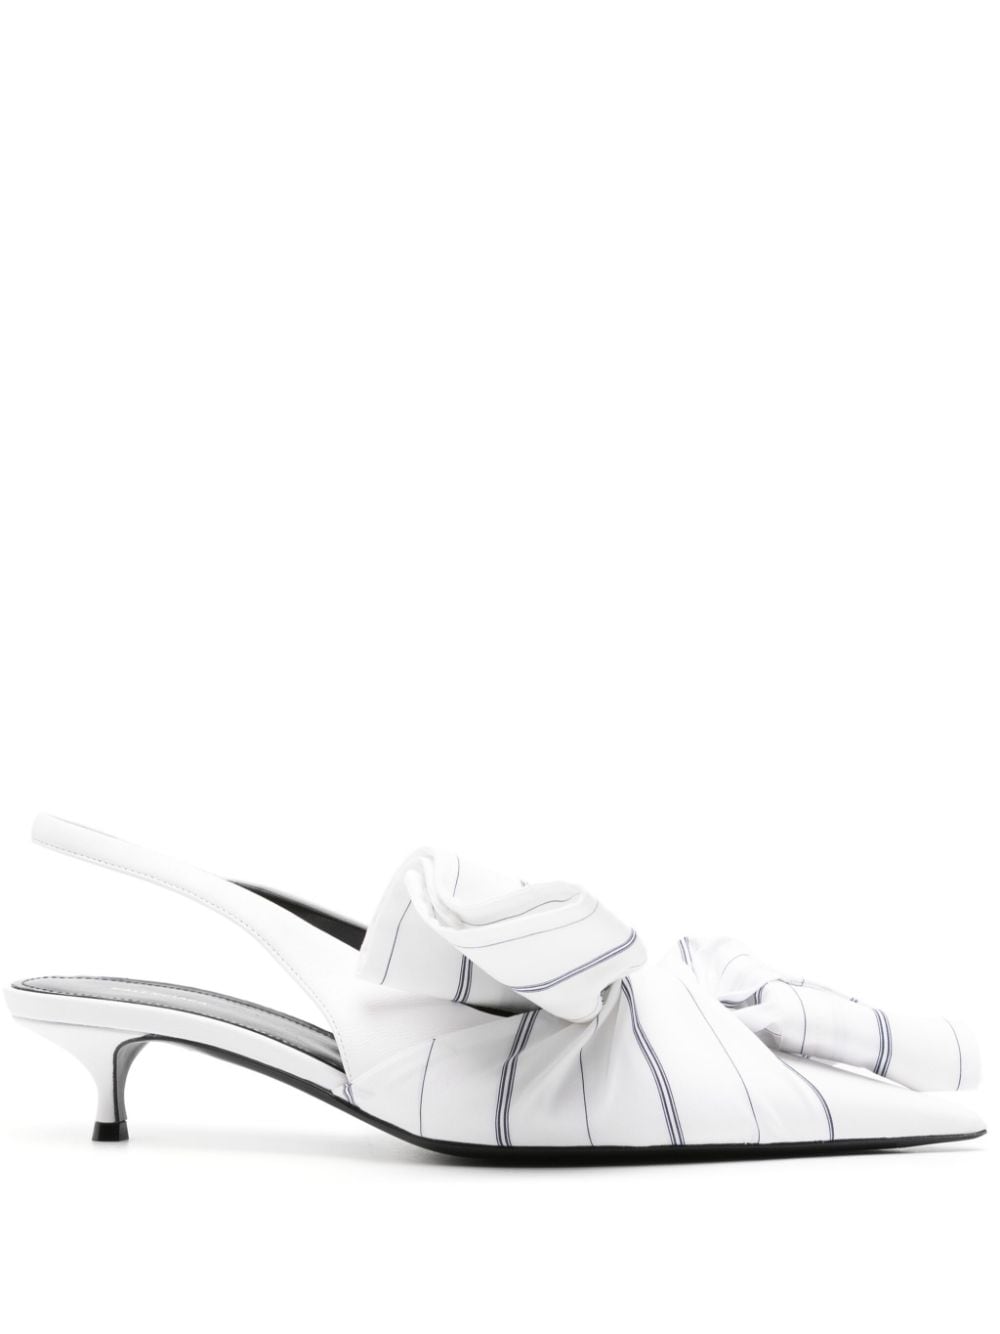 Balenciaga Knife Chemise 40mm Pumps In White